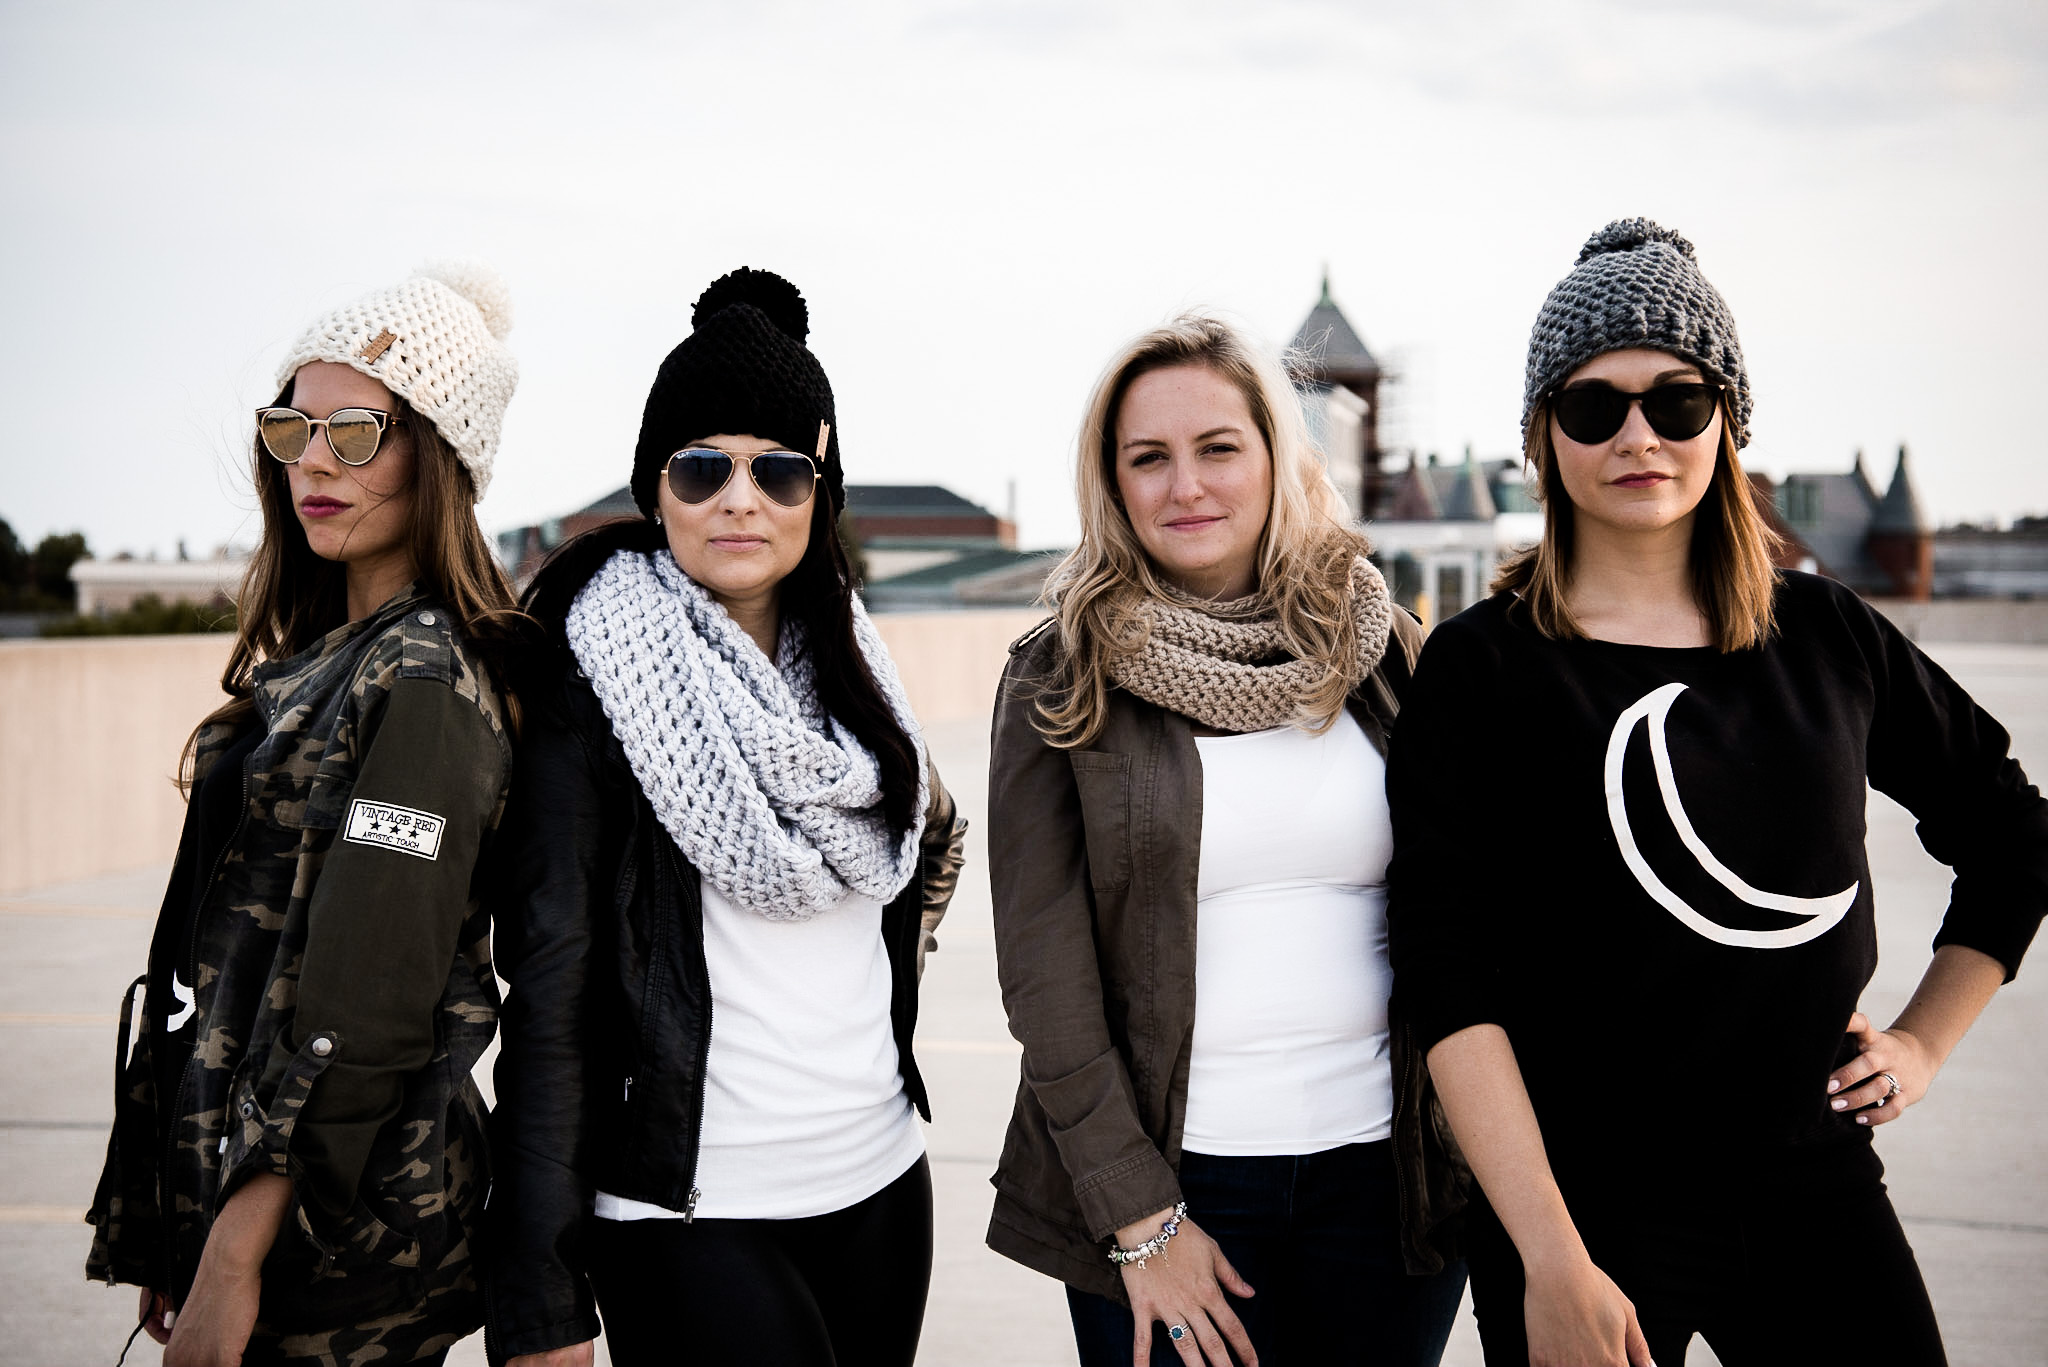 Four ladies donned in stylish hats and sunglasses, enjoying some rooftop moments.